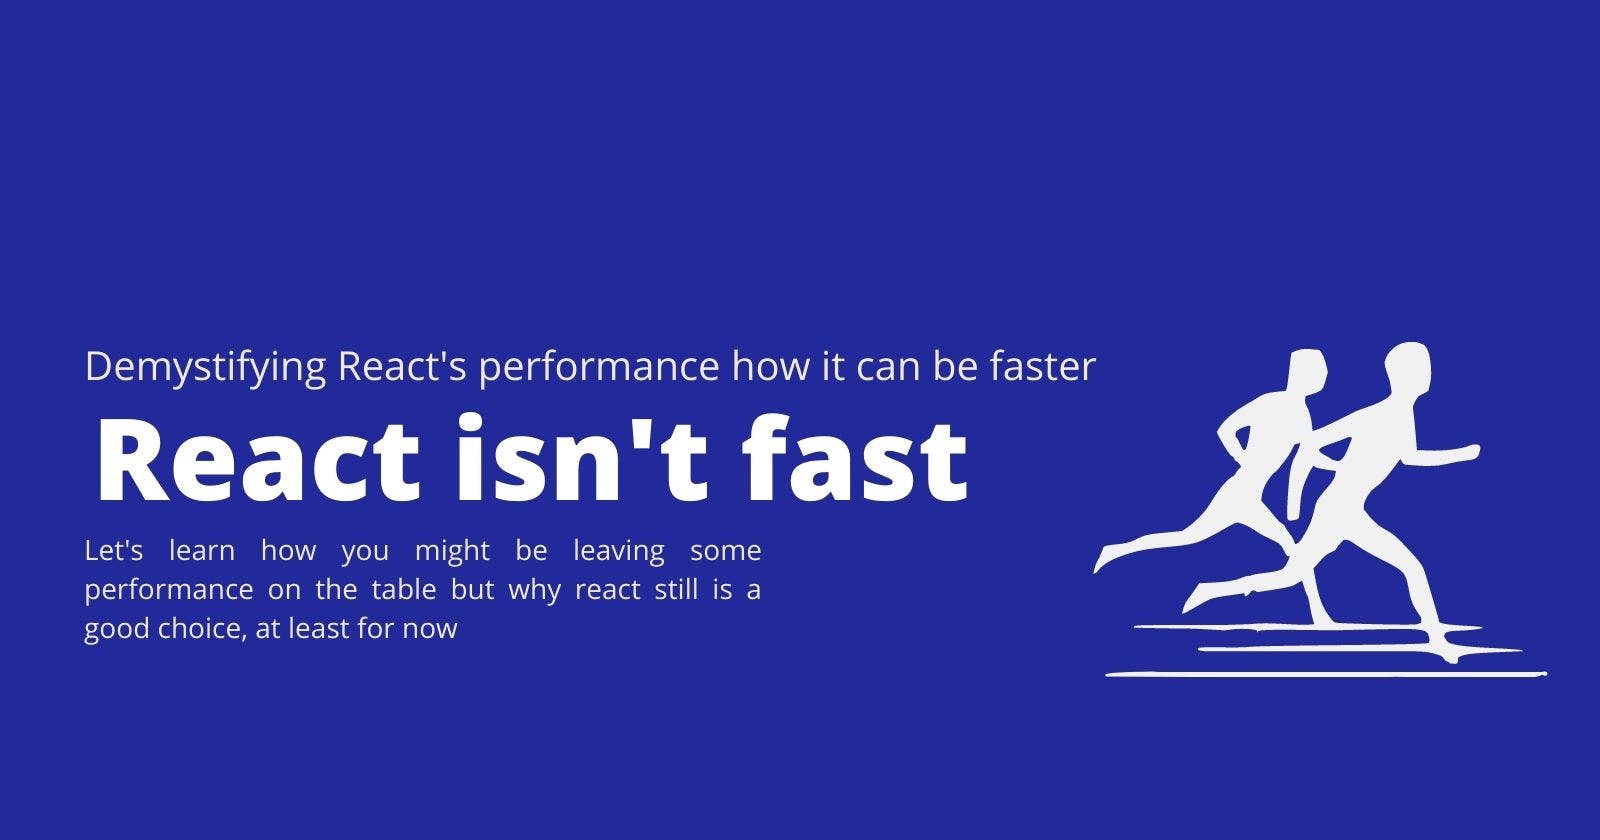 React isn't fast, let's learn why